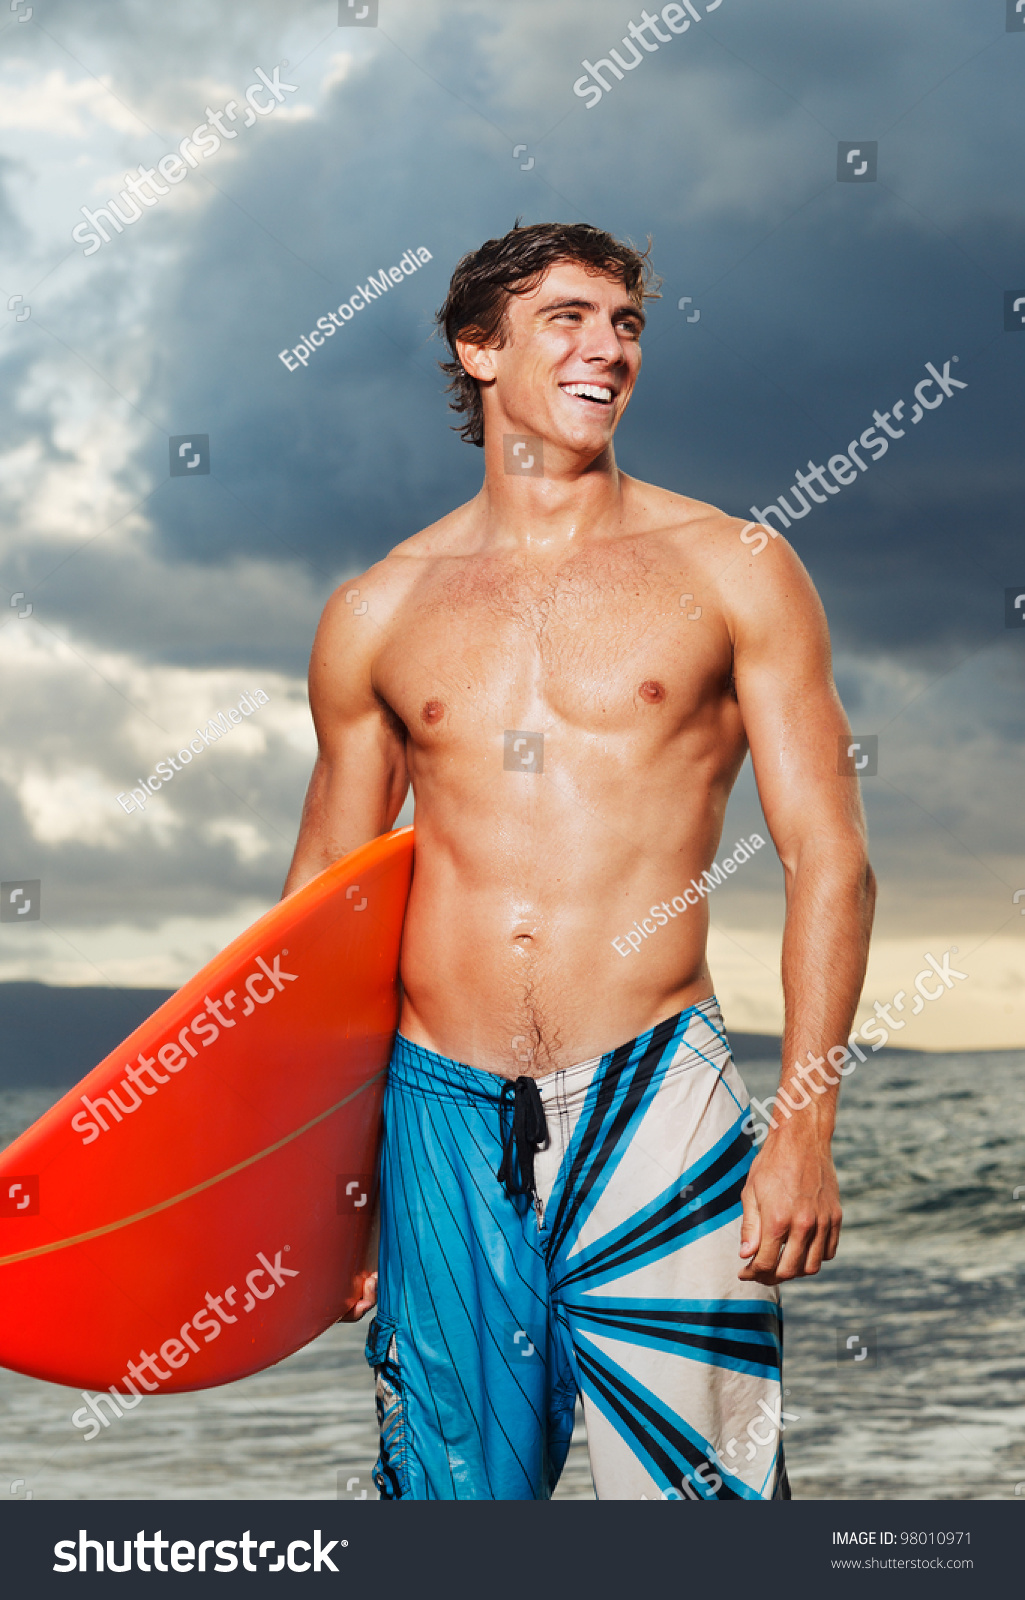 Professional Surfer Holding A Surf Board Stock Photo 98010971 ...